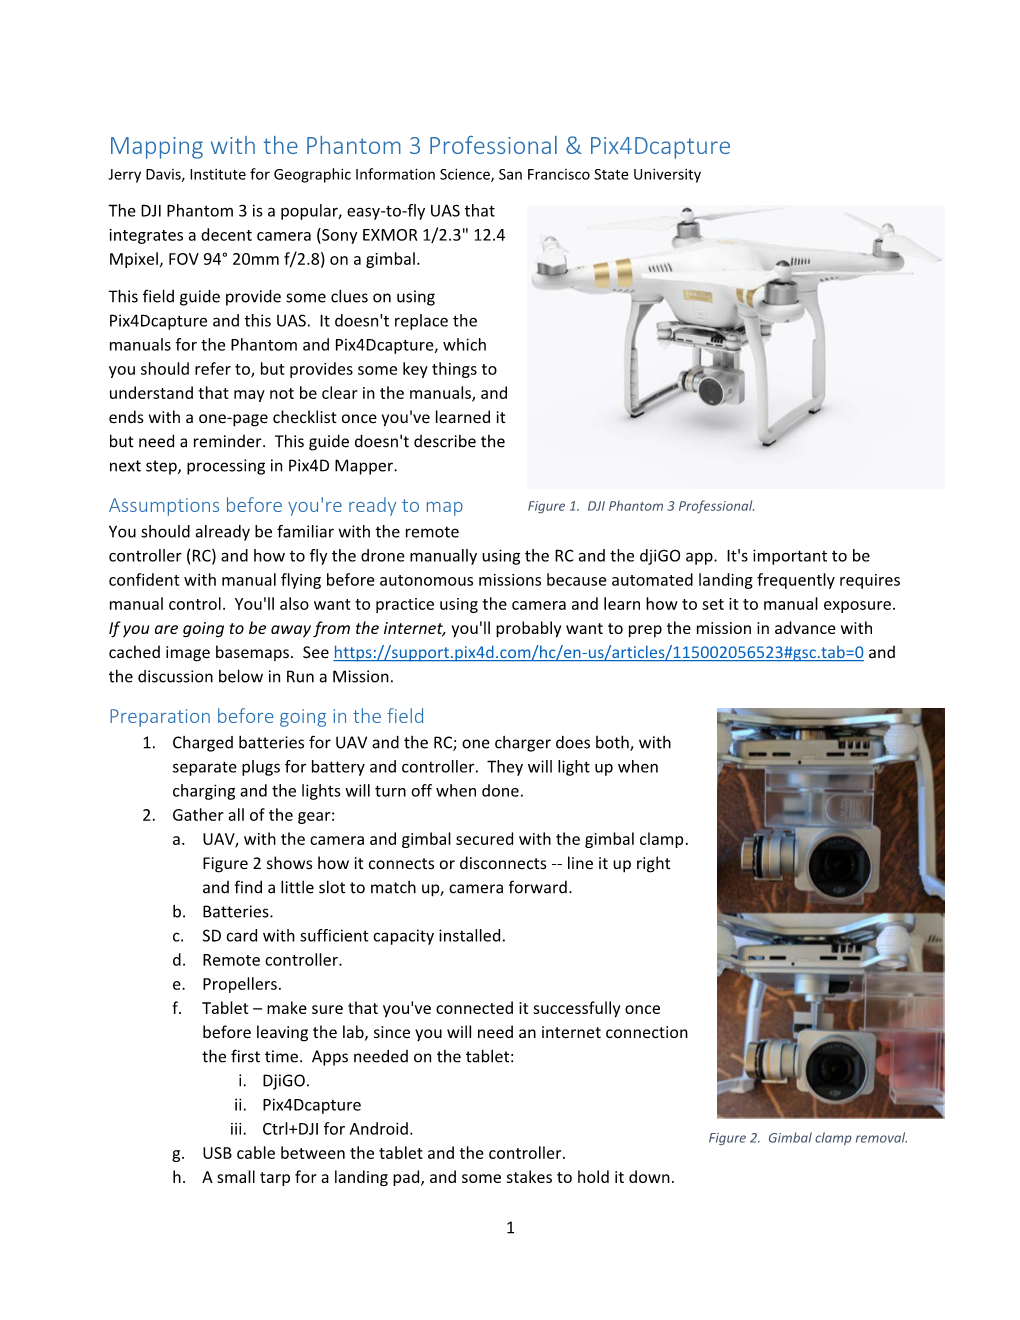 Mapping Guide to Phantom 3 and Pix4dcapture